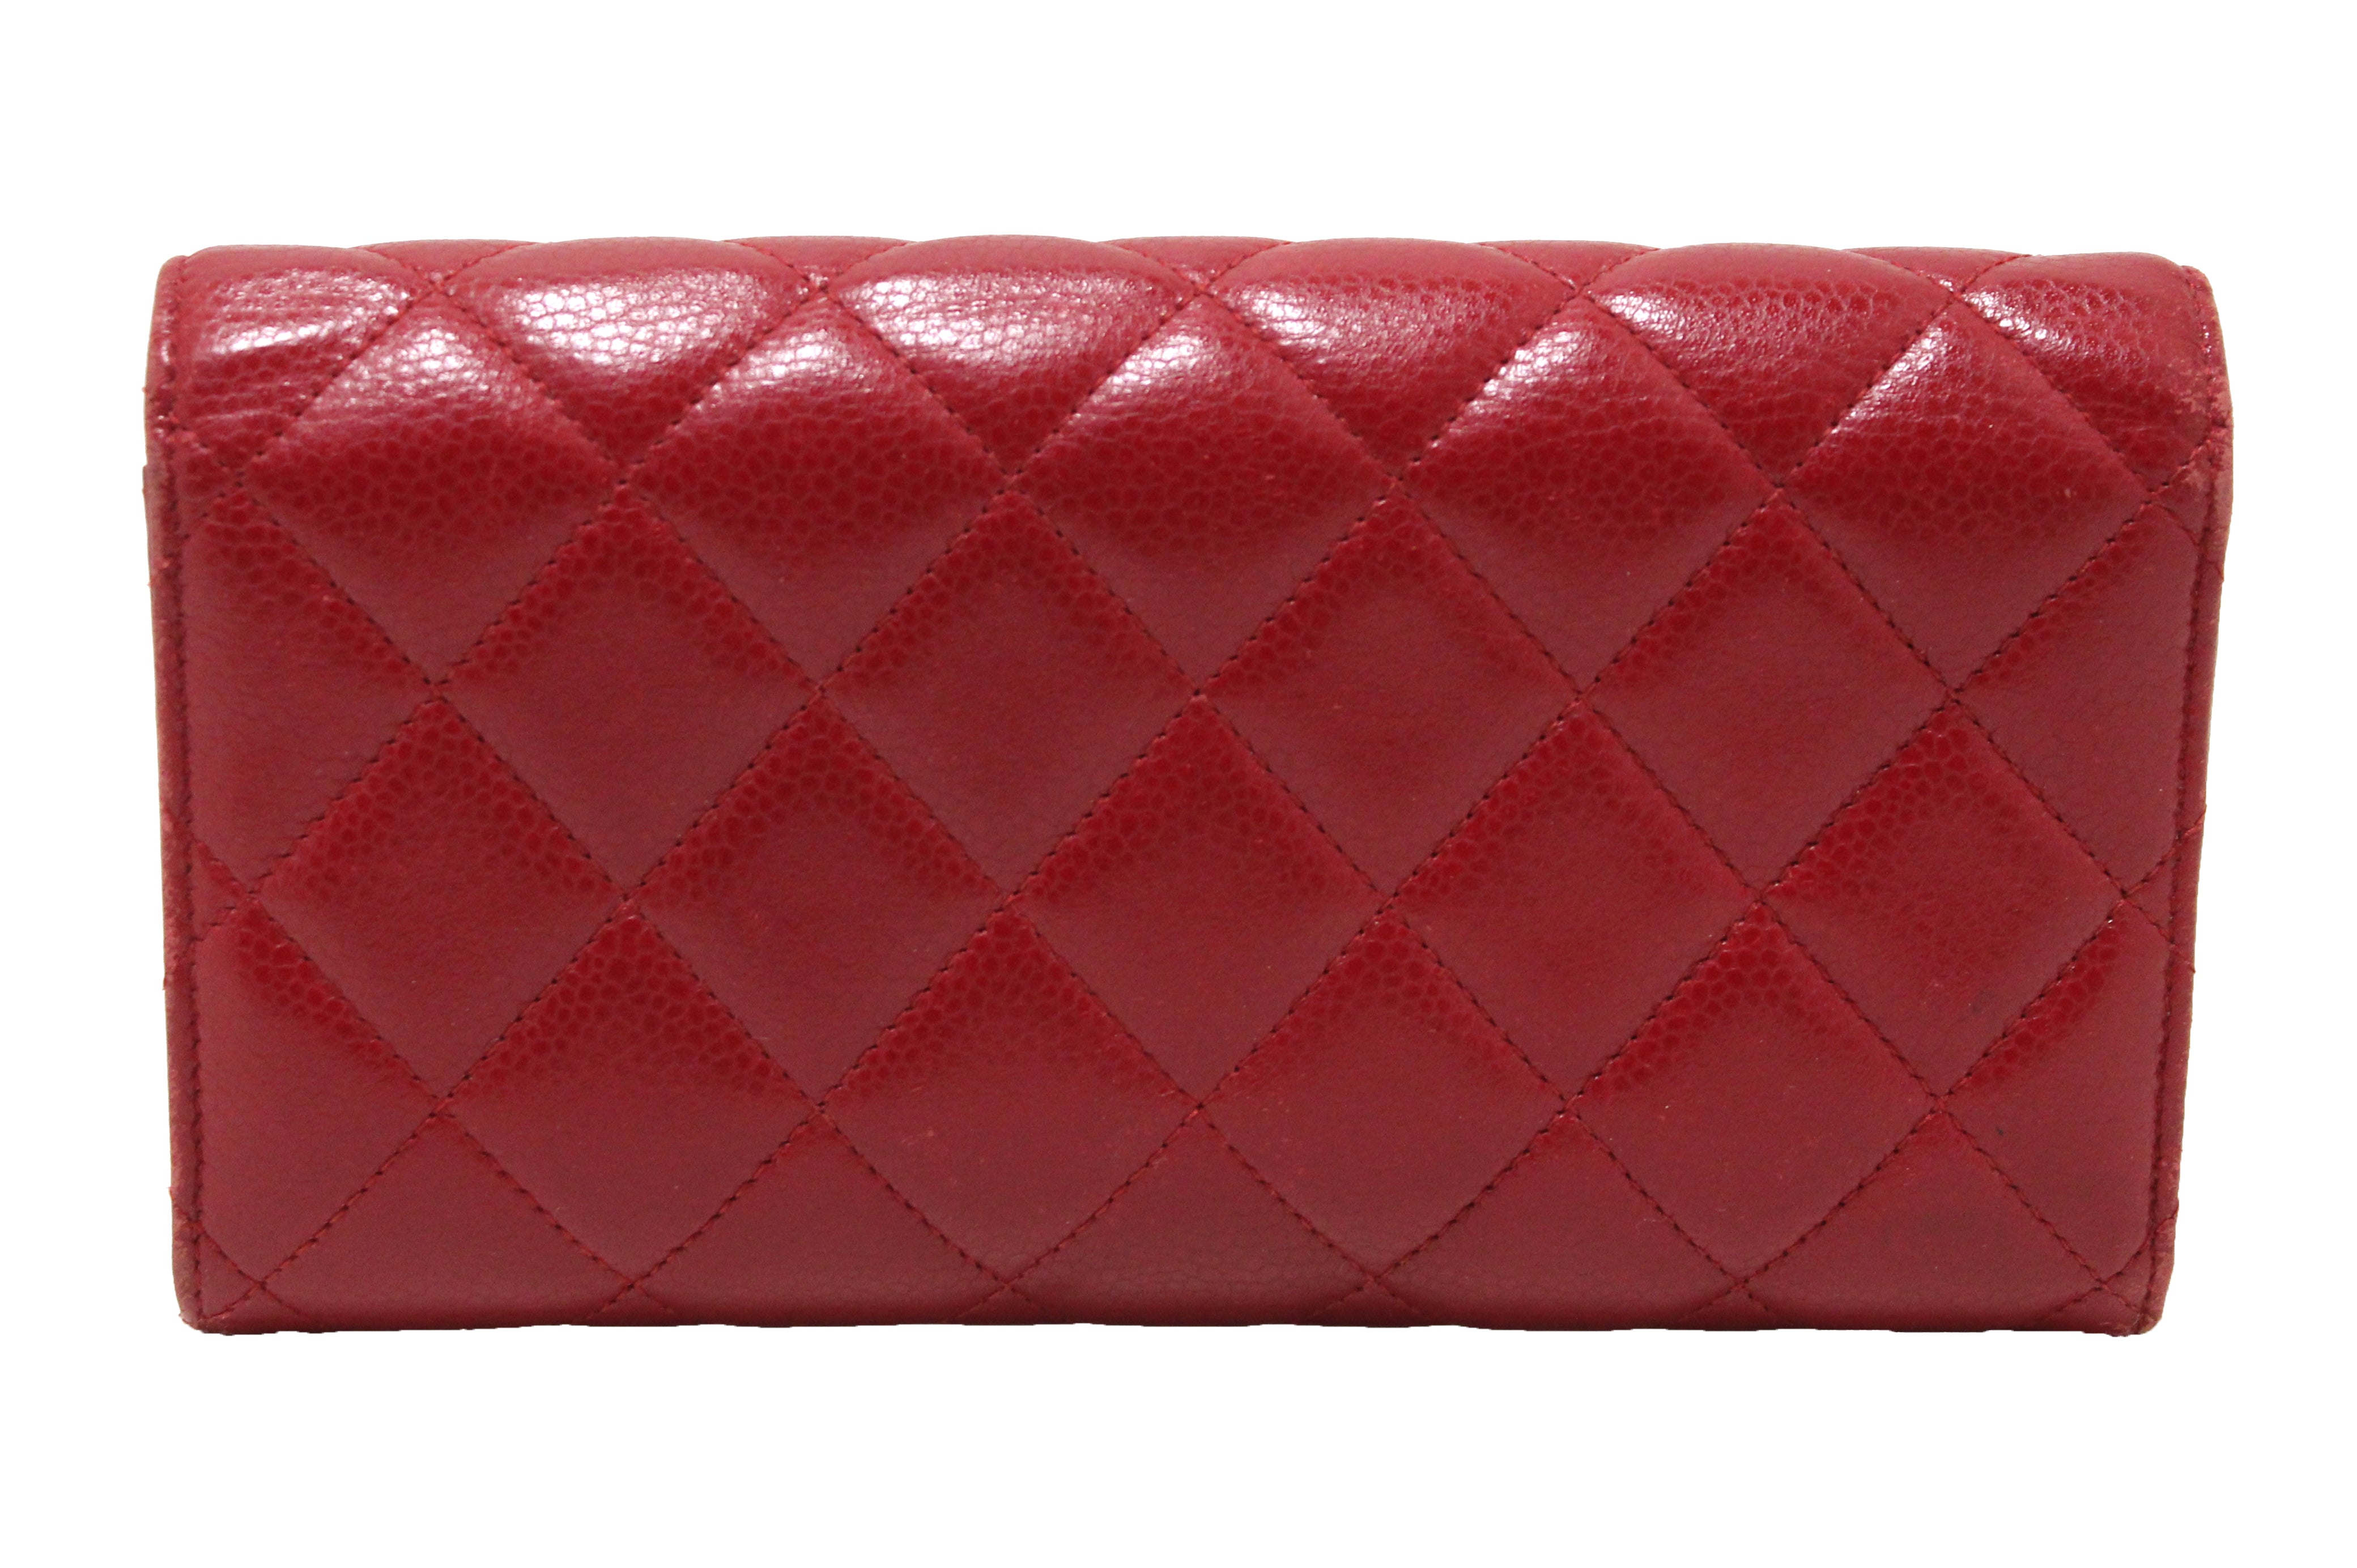 Authentic Chanel Red Caviar Leather Quilted Long Flap Wallet